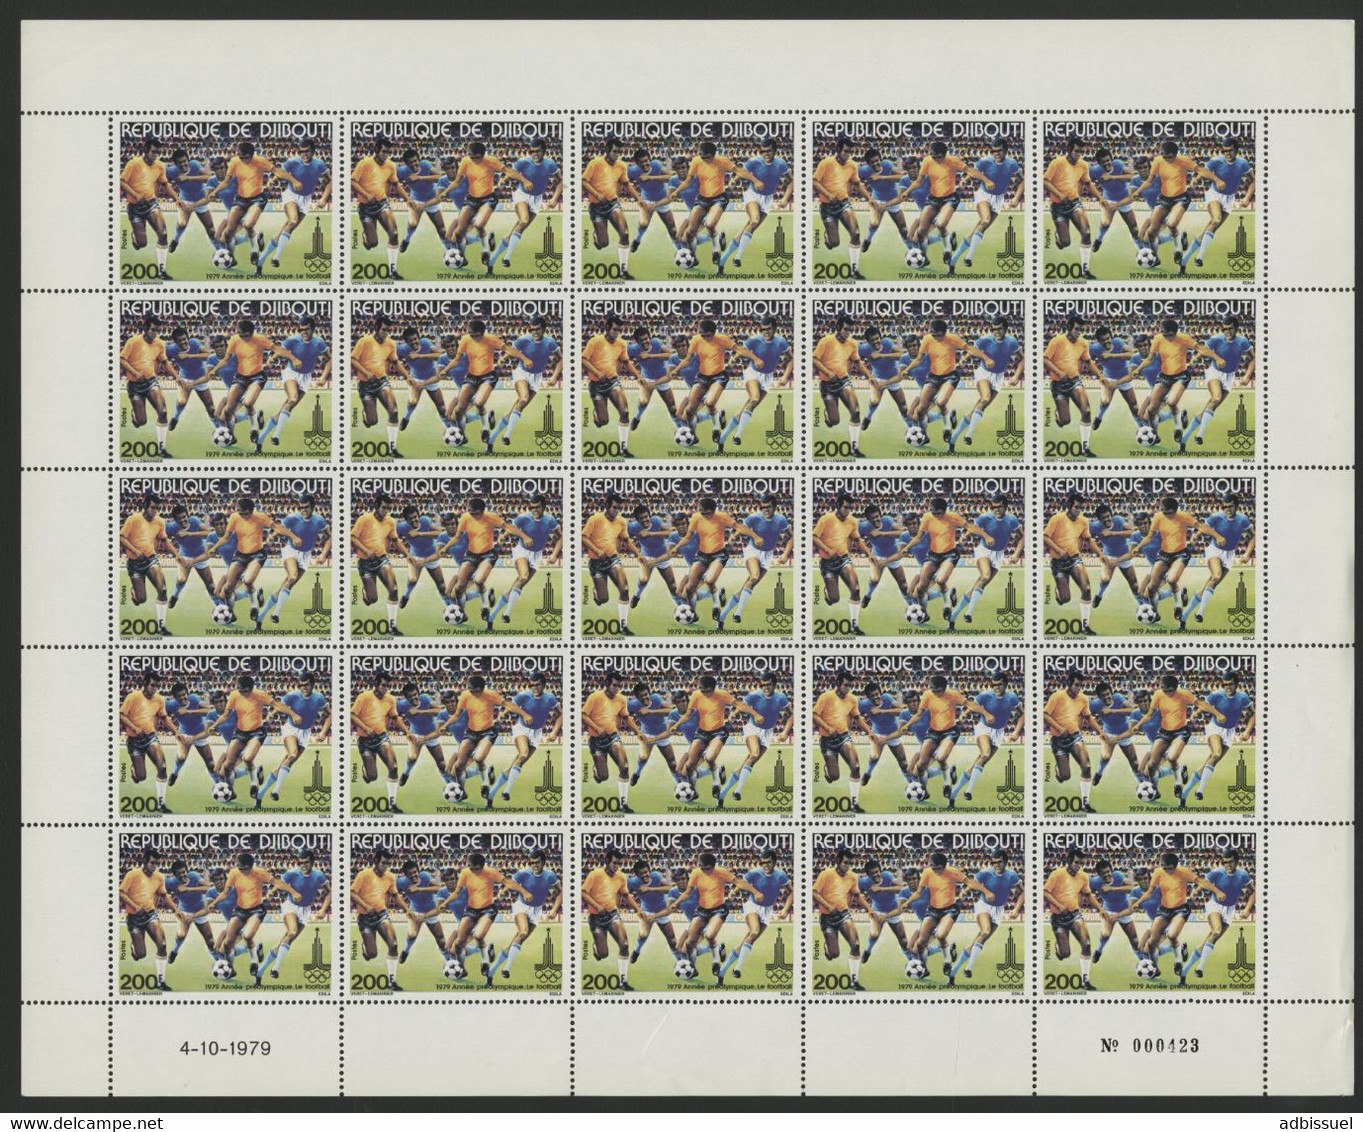 DJIBOUTI N° 511 COTE 106,25 € FEUILLE De 25 Ex. MNH ** ANNEE PREOLYMPIQUE OLYMPIC FOOTBALL SOCCER - Ete 1980: Moscou